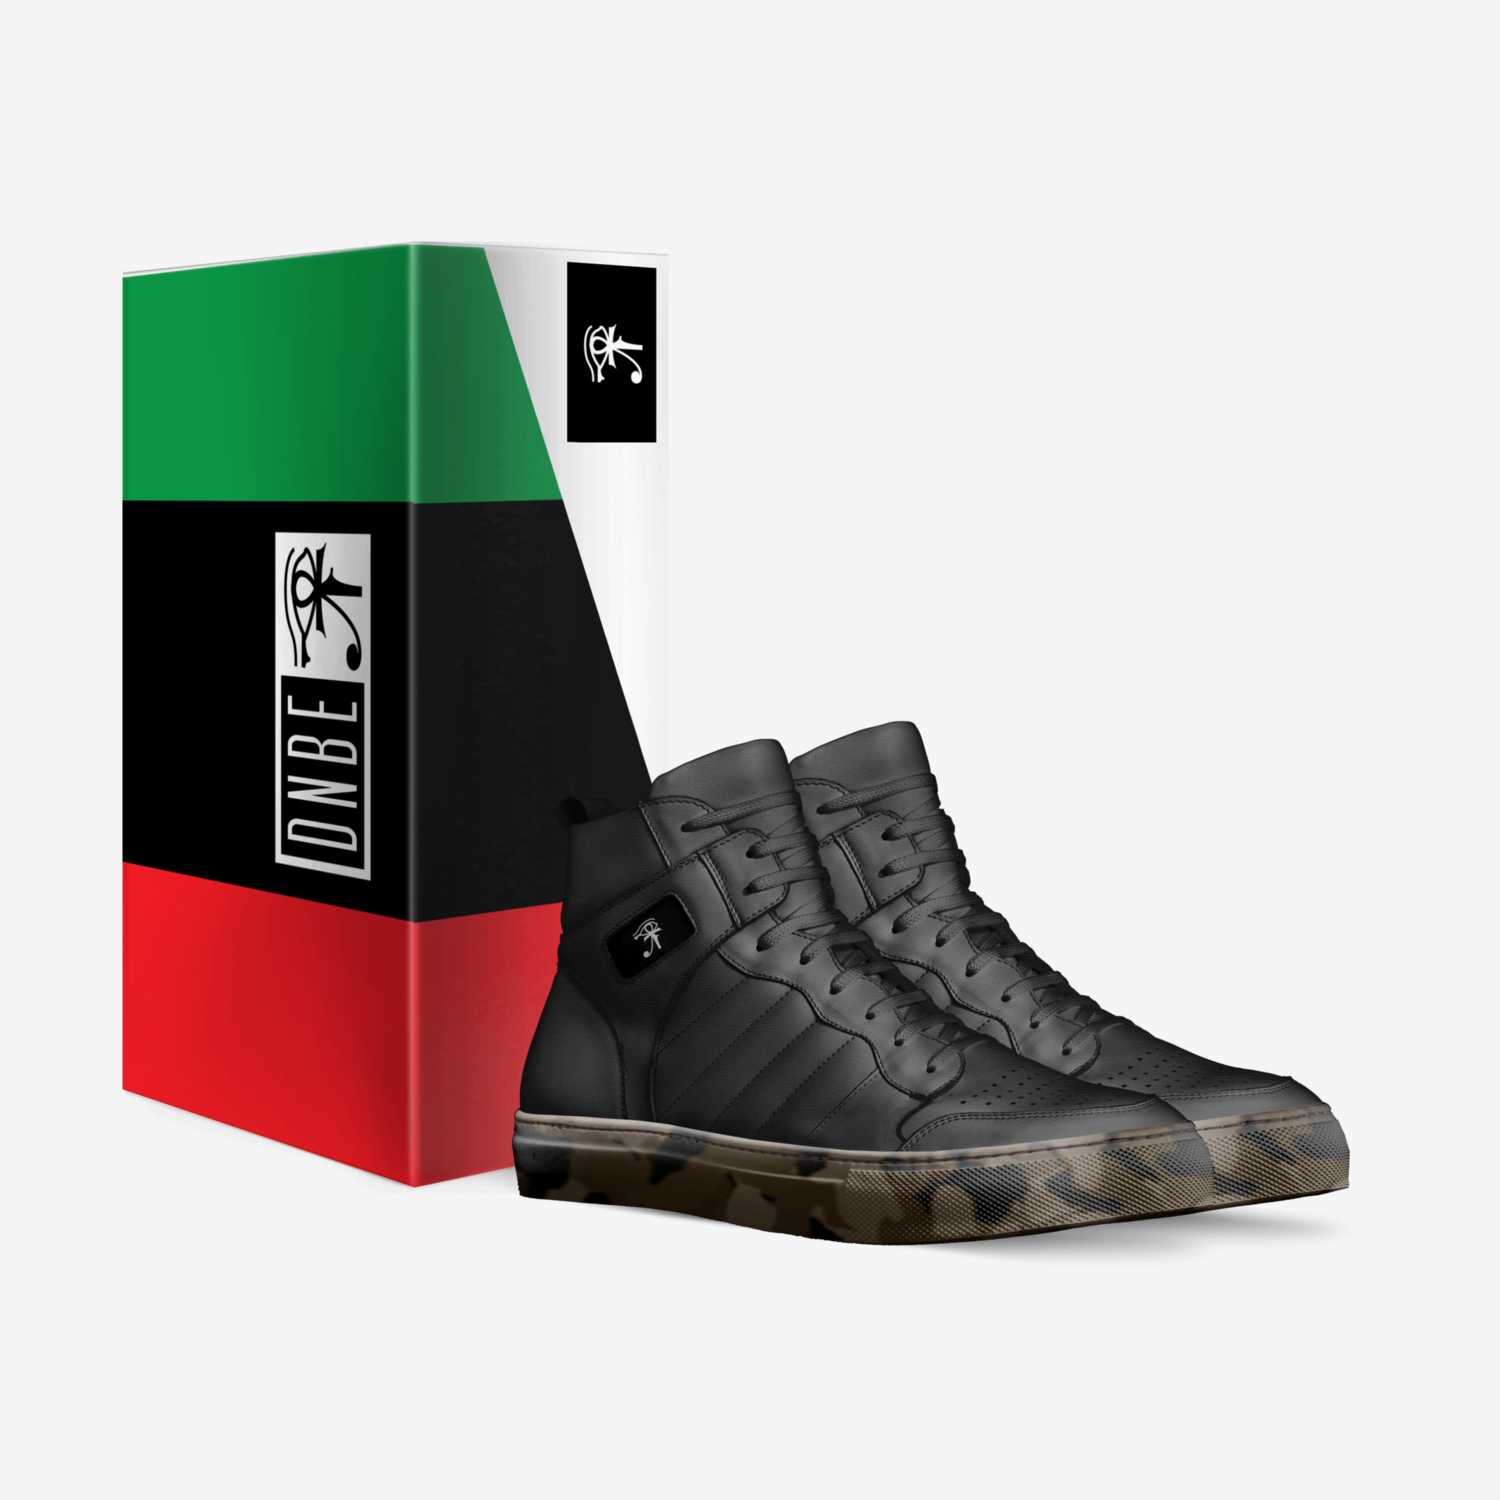 Shujaa custom made in Italy shoes by Dnbe Apparel | Box view